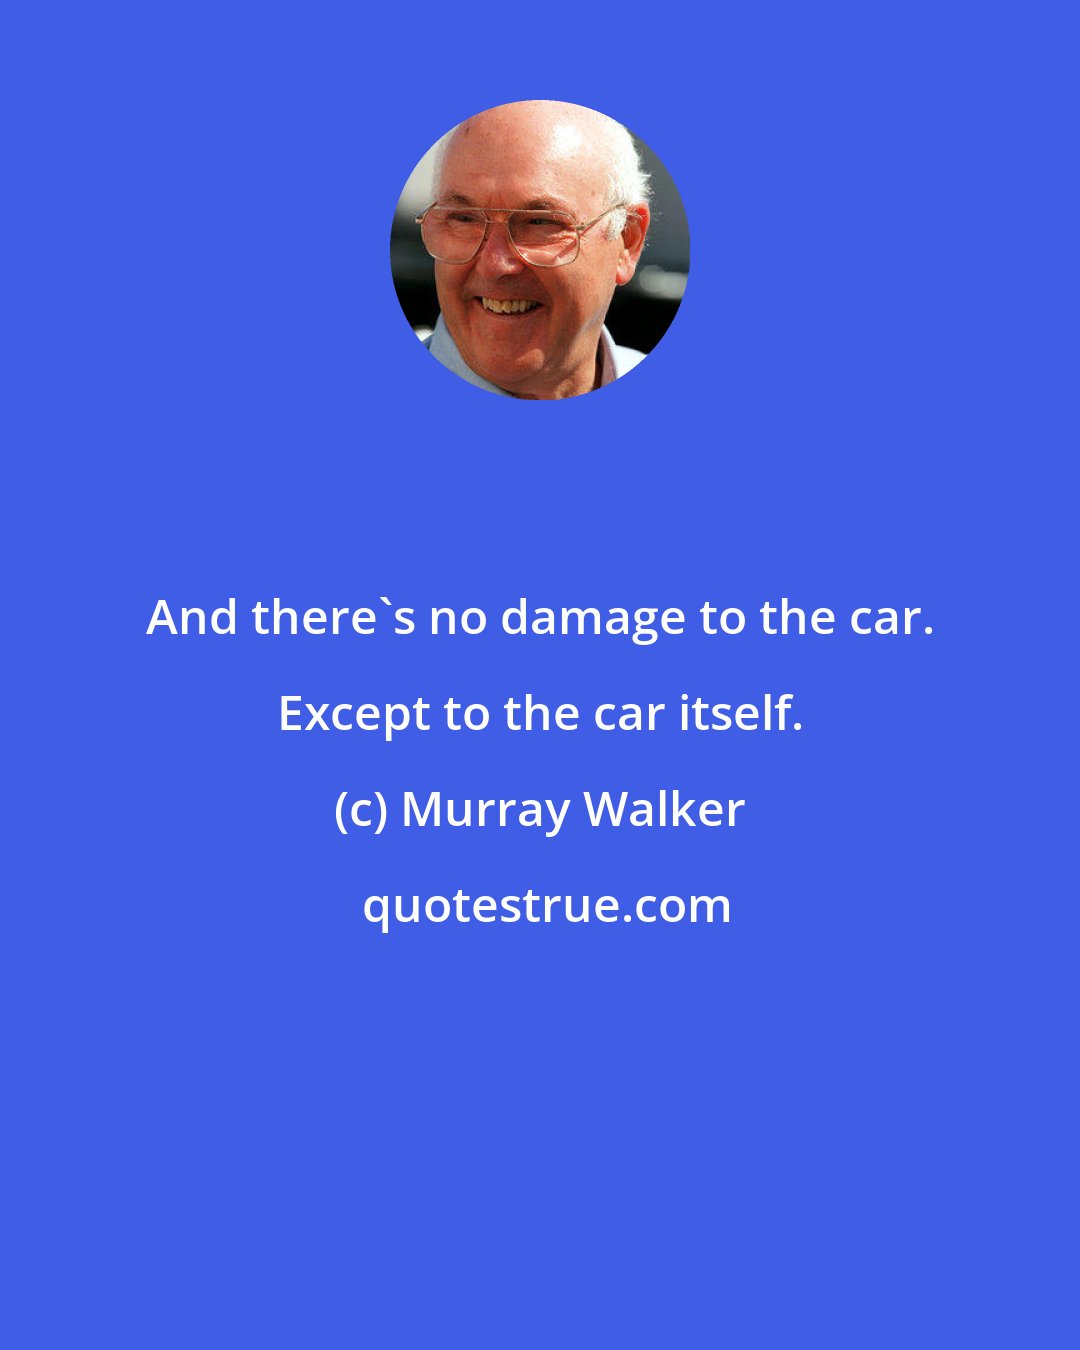 Murray Walker: And there's no damage to the car. Except to the car itself.